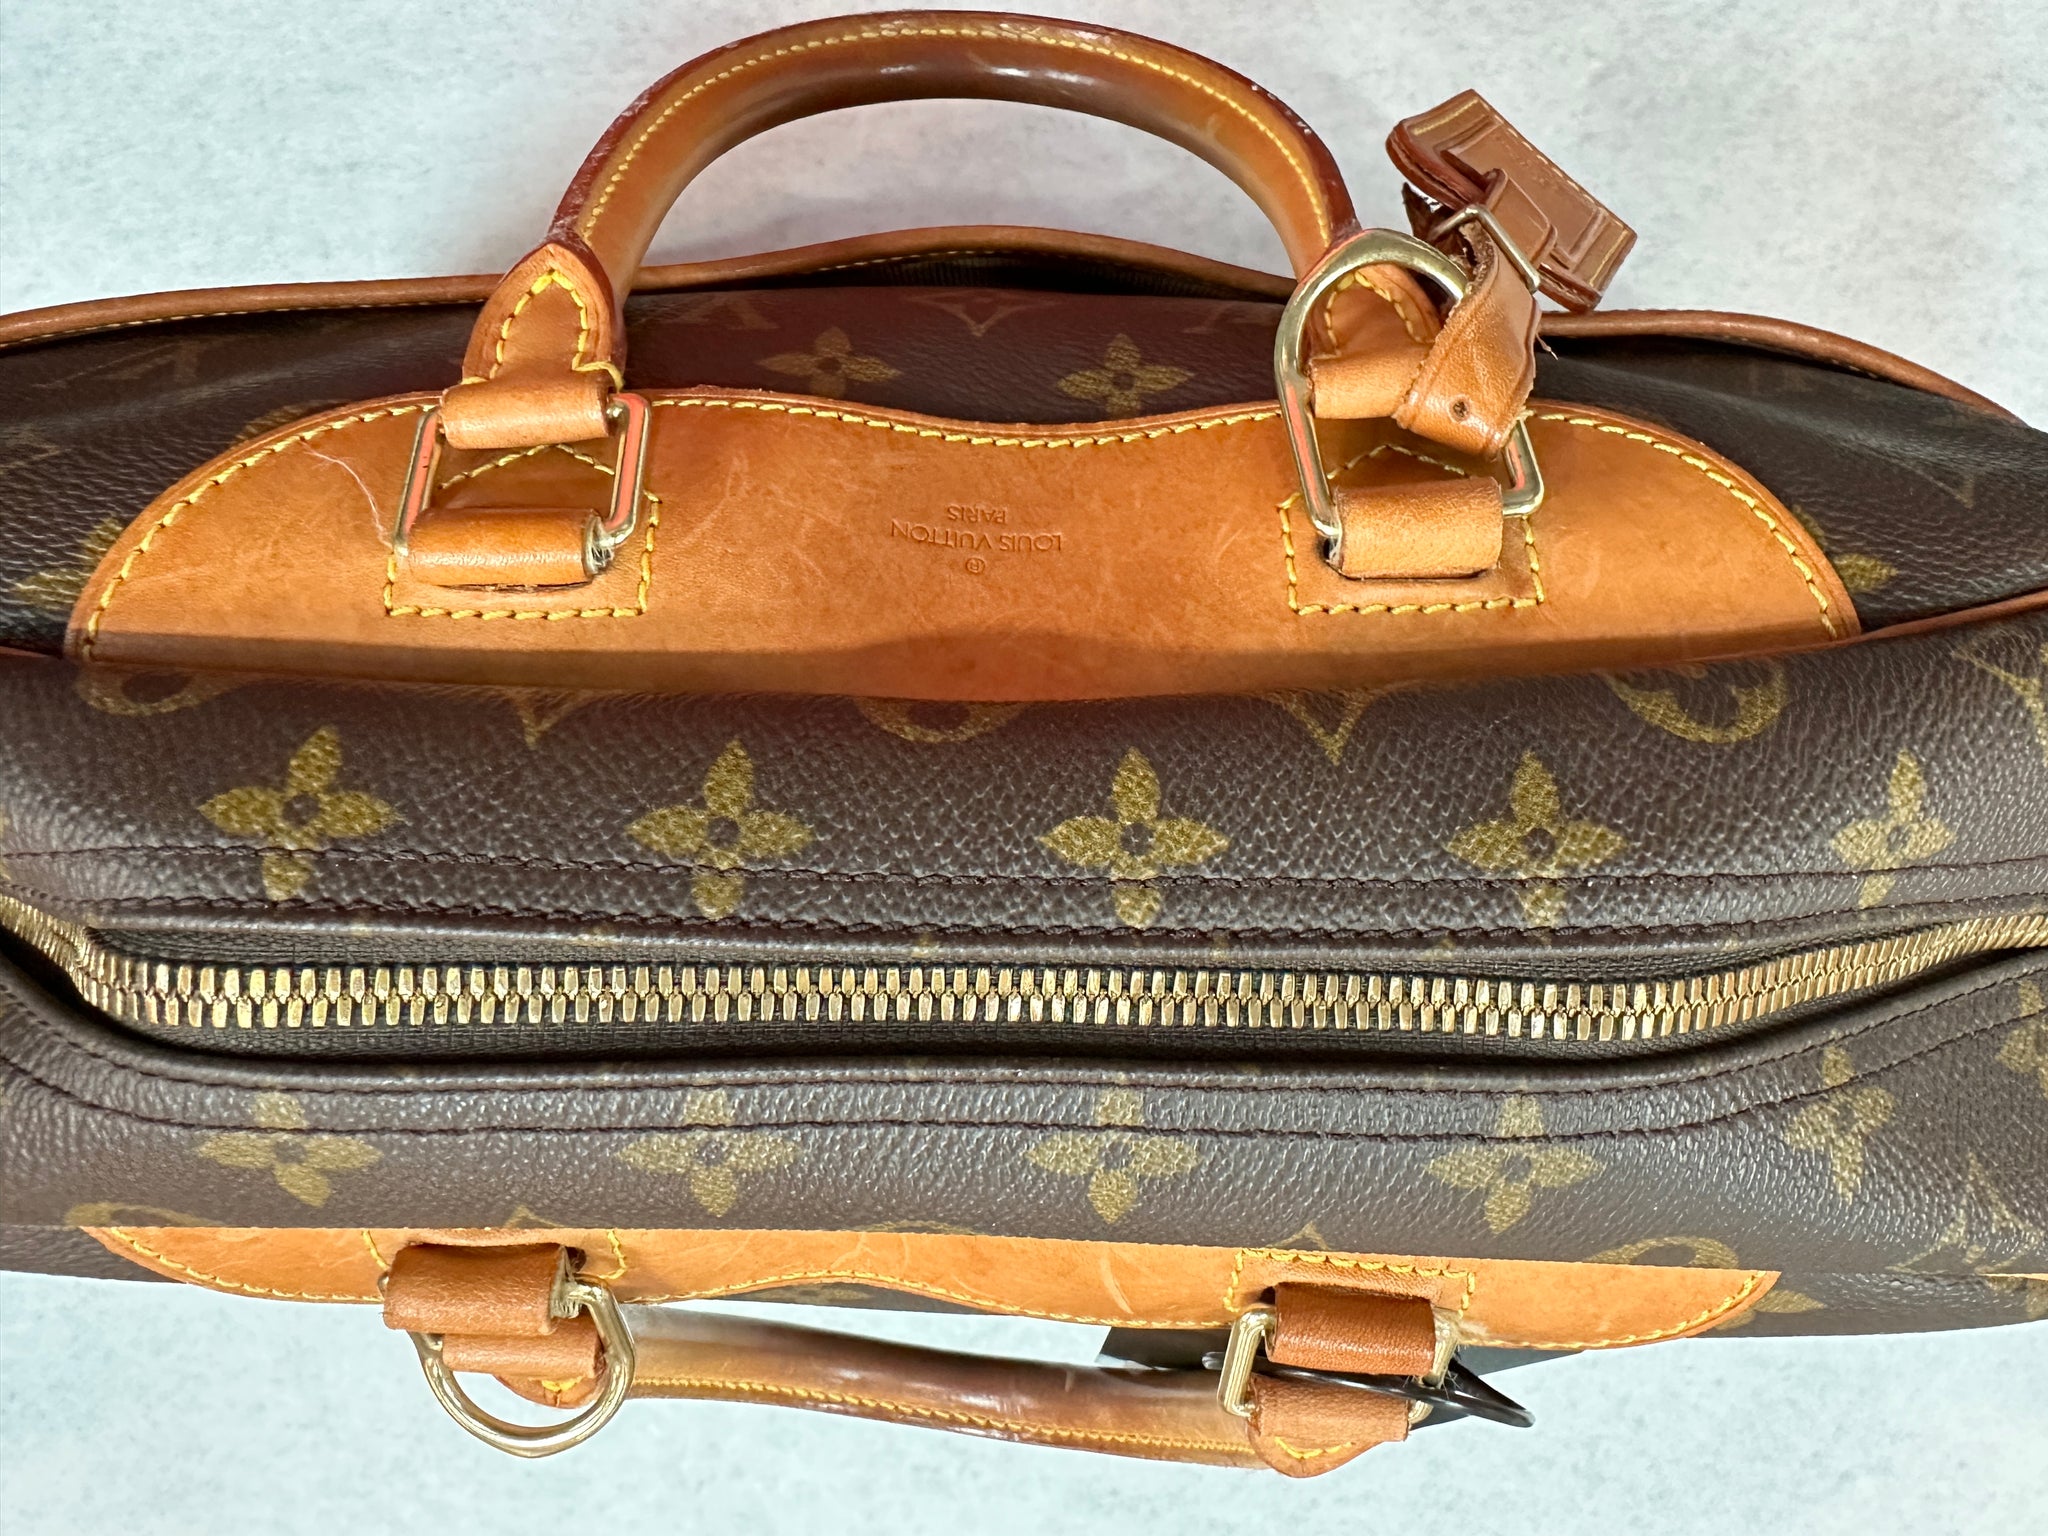 Louis Vuitton Deauville Monogram 2004 in Very Good Condition with Bag,  Dustbag, Leather Tag, Padlock and Key Harga 7.000.000 #lvdeauville